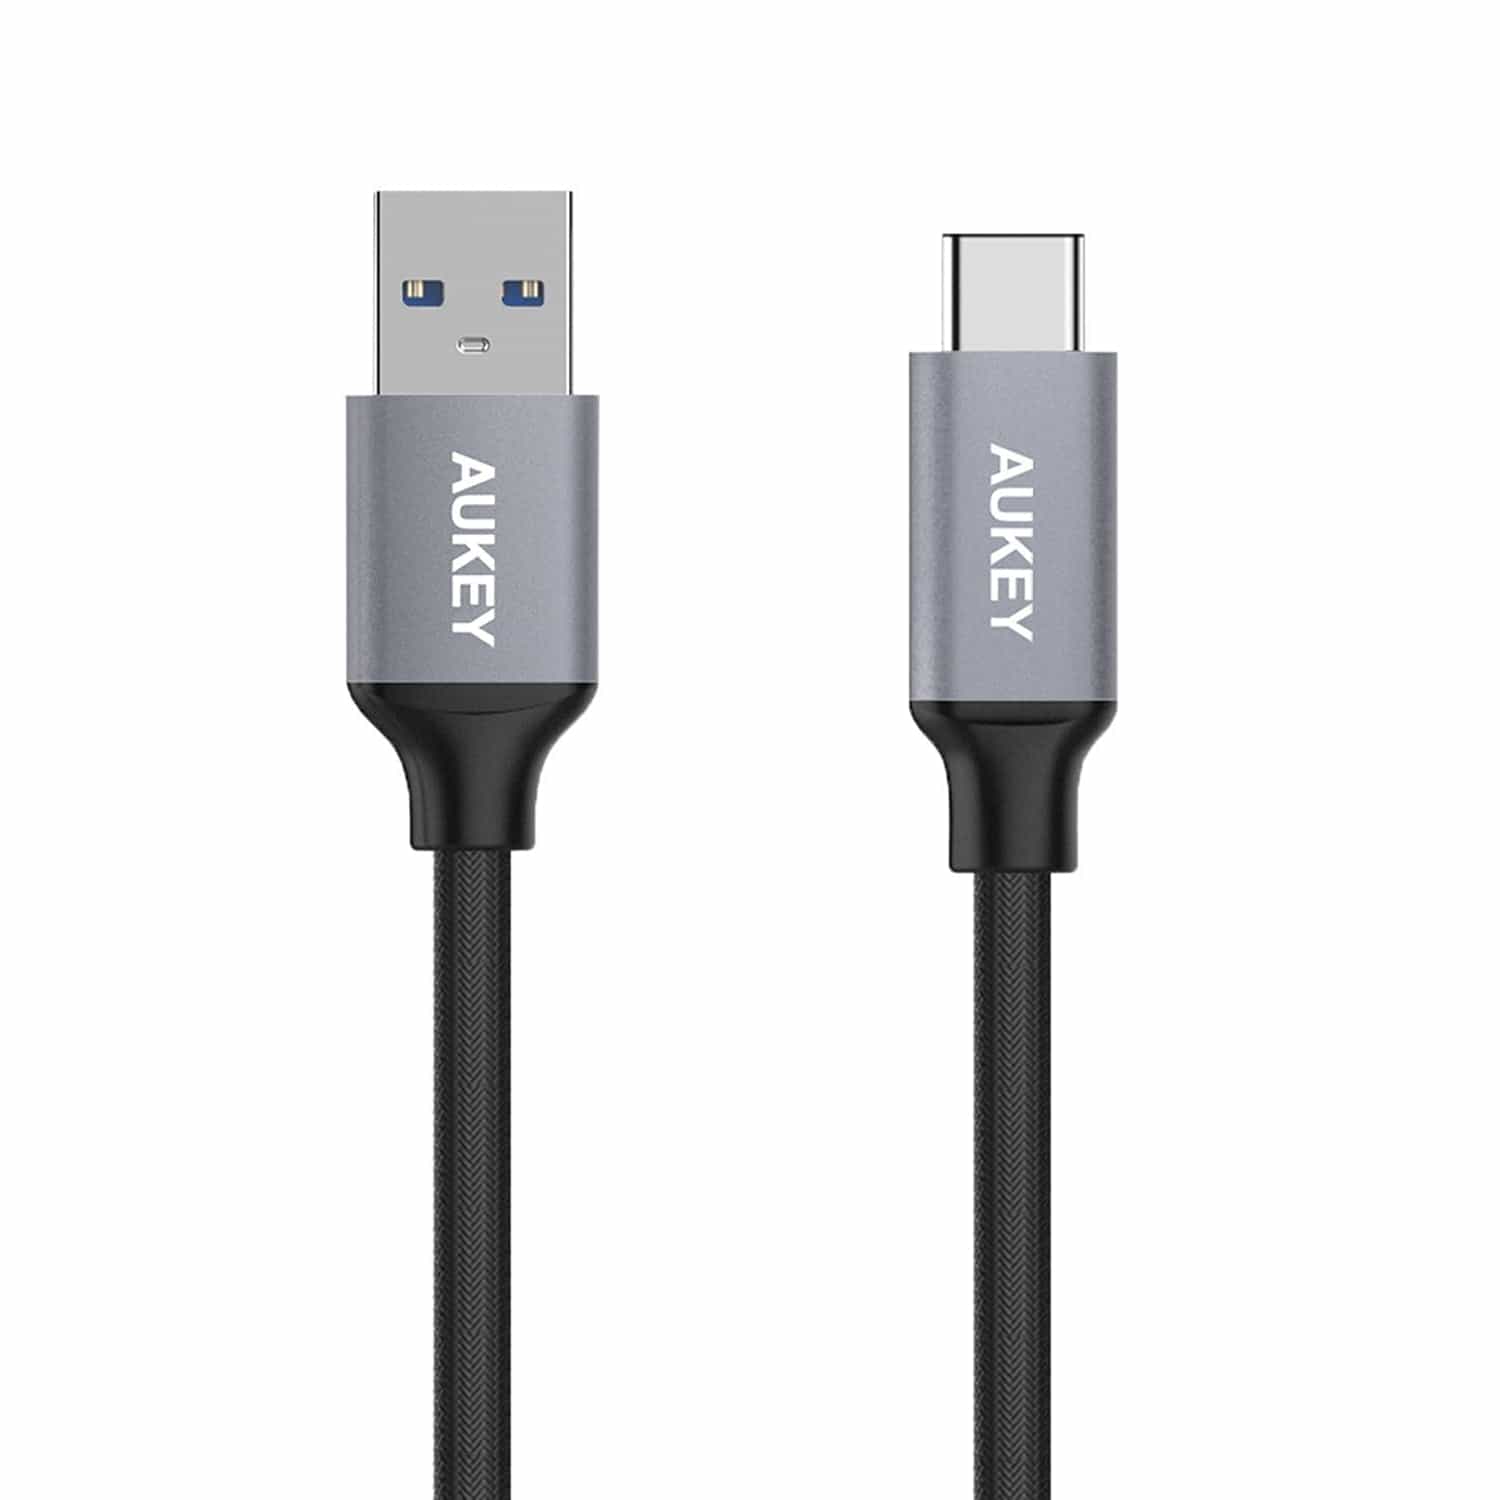 CB-CD1 USB-C to USB 3.0 Quick Charge 3.0 Nylon Braided Cable - 0.3M